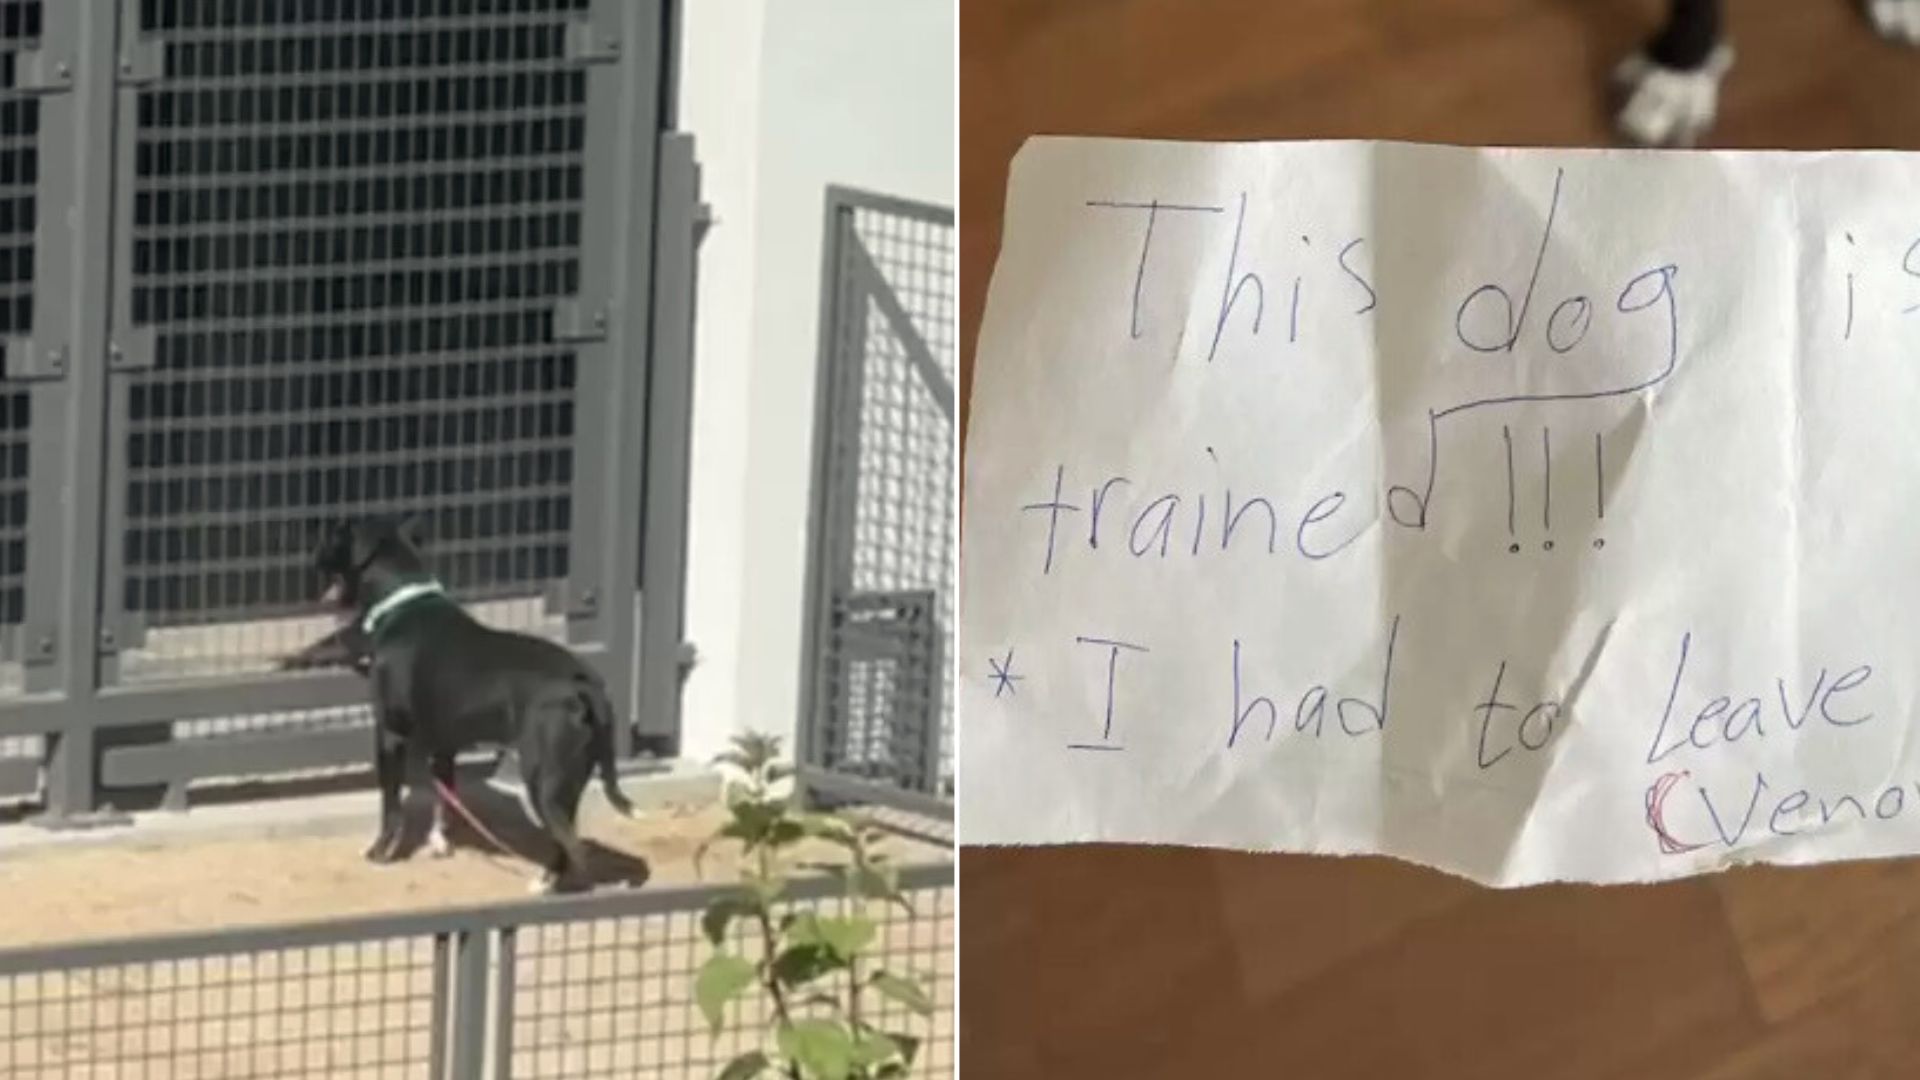 Owner Left His Dog Alone In The Park With A Heartbreaking Note